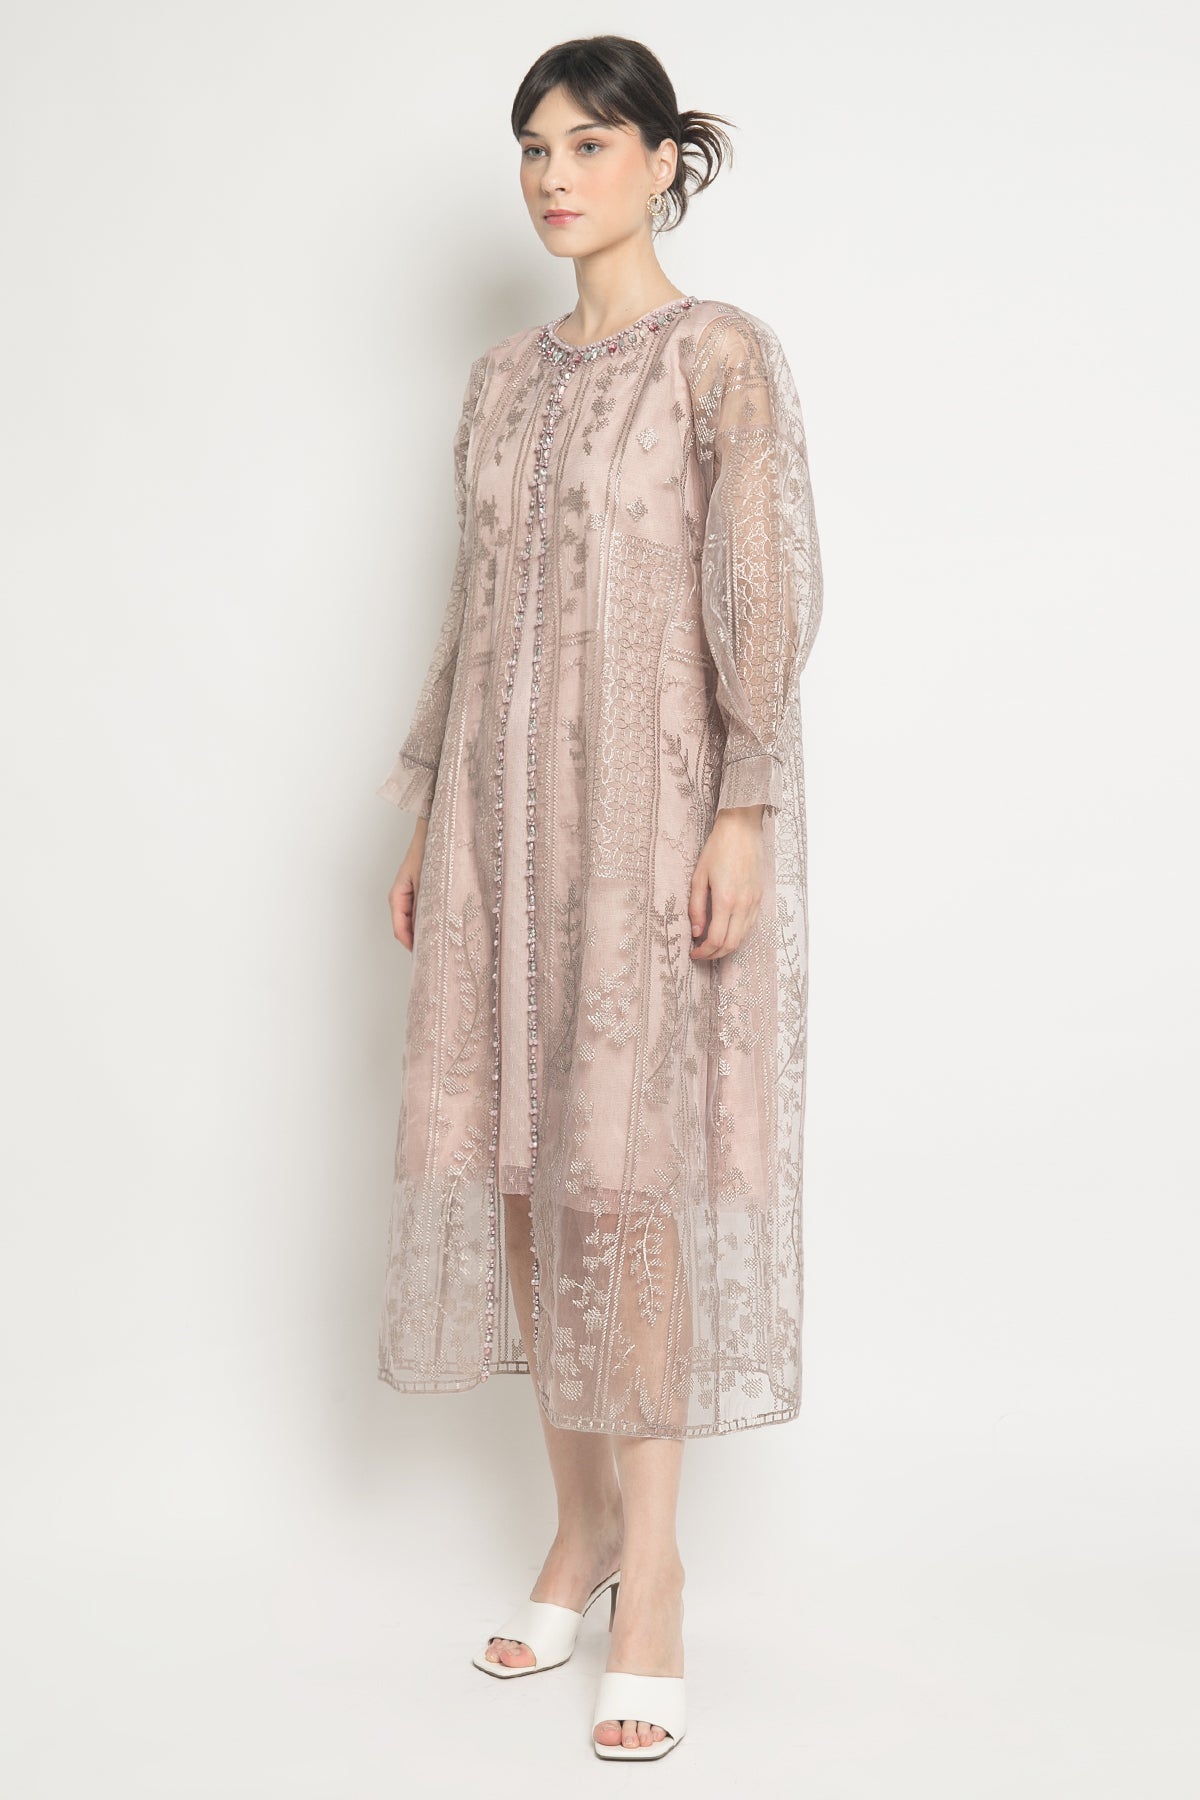 Kaia Long Outer Dress in Pink Mauve